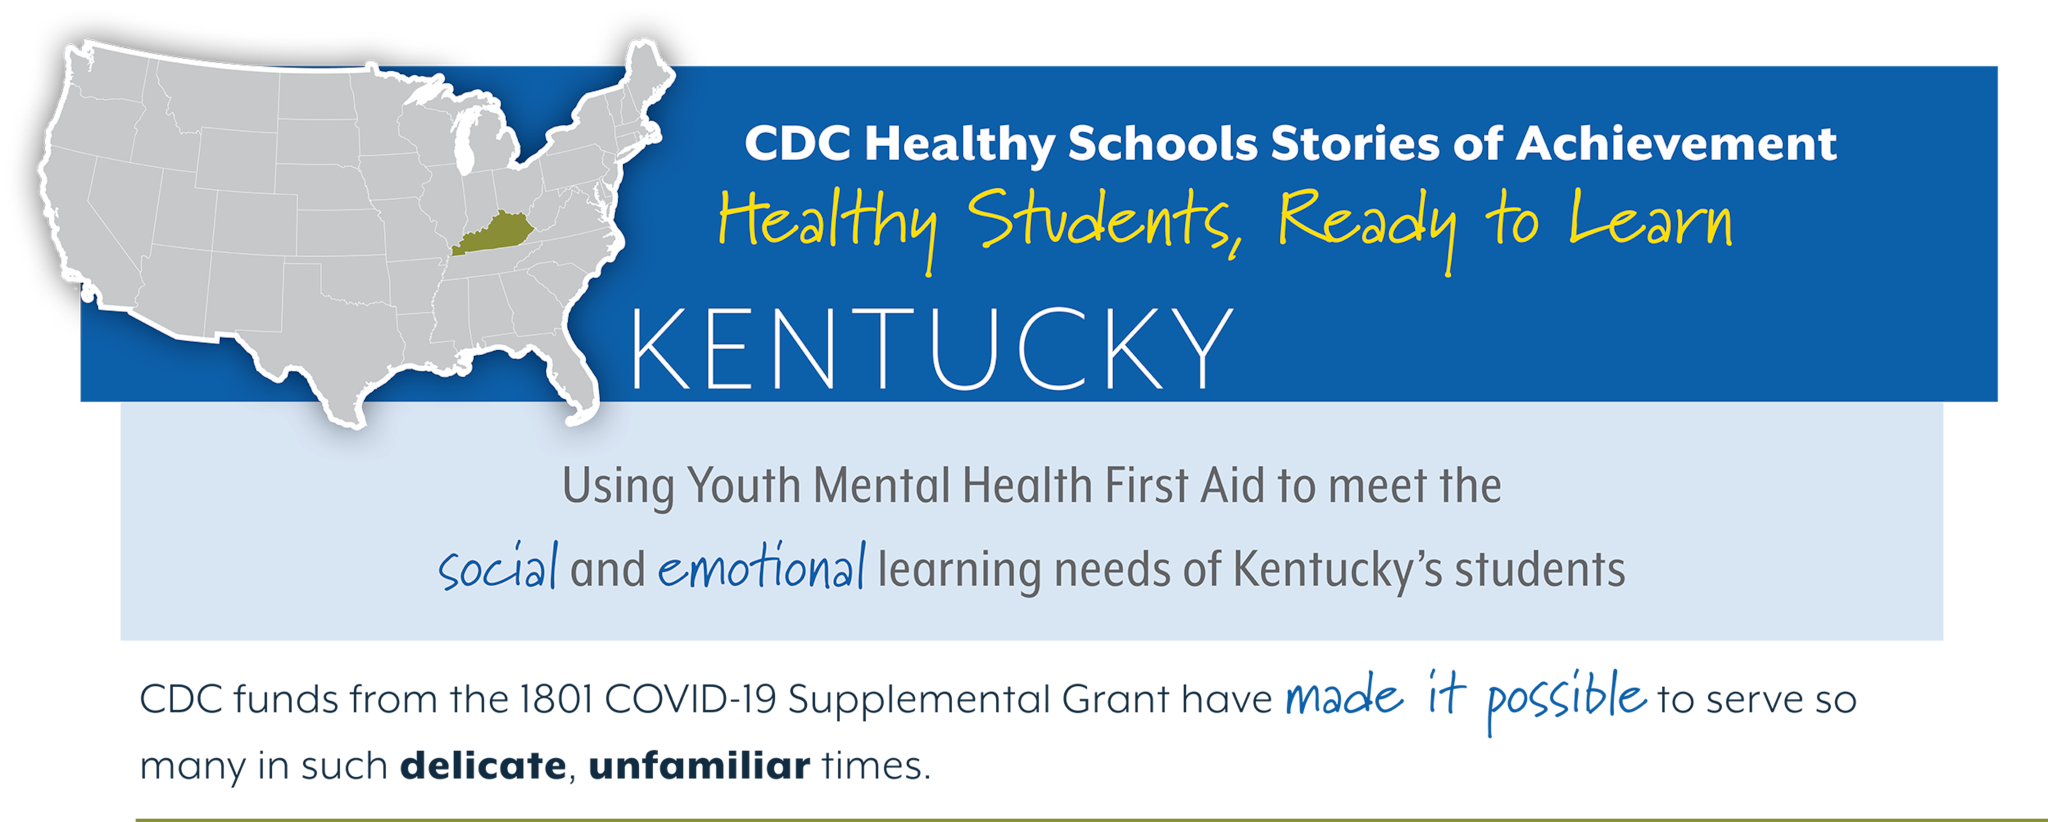 CDC Healthy Schools Stories of Achievement  Healthy Students, Ready to Learn  KENTUCKY Using Youth Mental Health First Aid to meet the  social and emotonal learning needs of Kentucky’s students  CDC funds from the 1801 COVID-19 Supplemental Grant have made it possible to serve so  many in such delicate, unfamiliar times. 